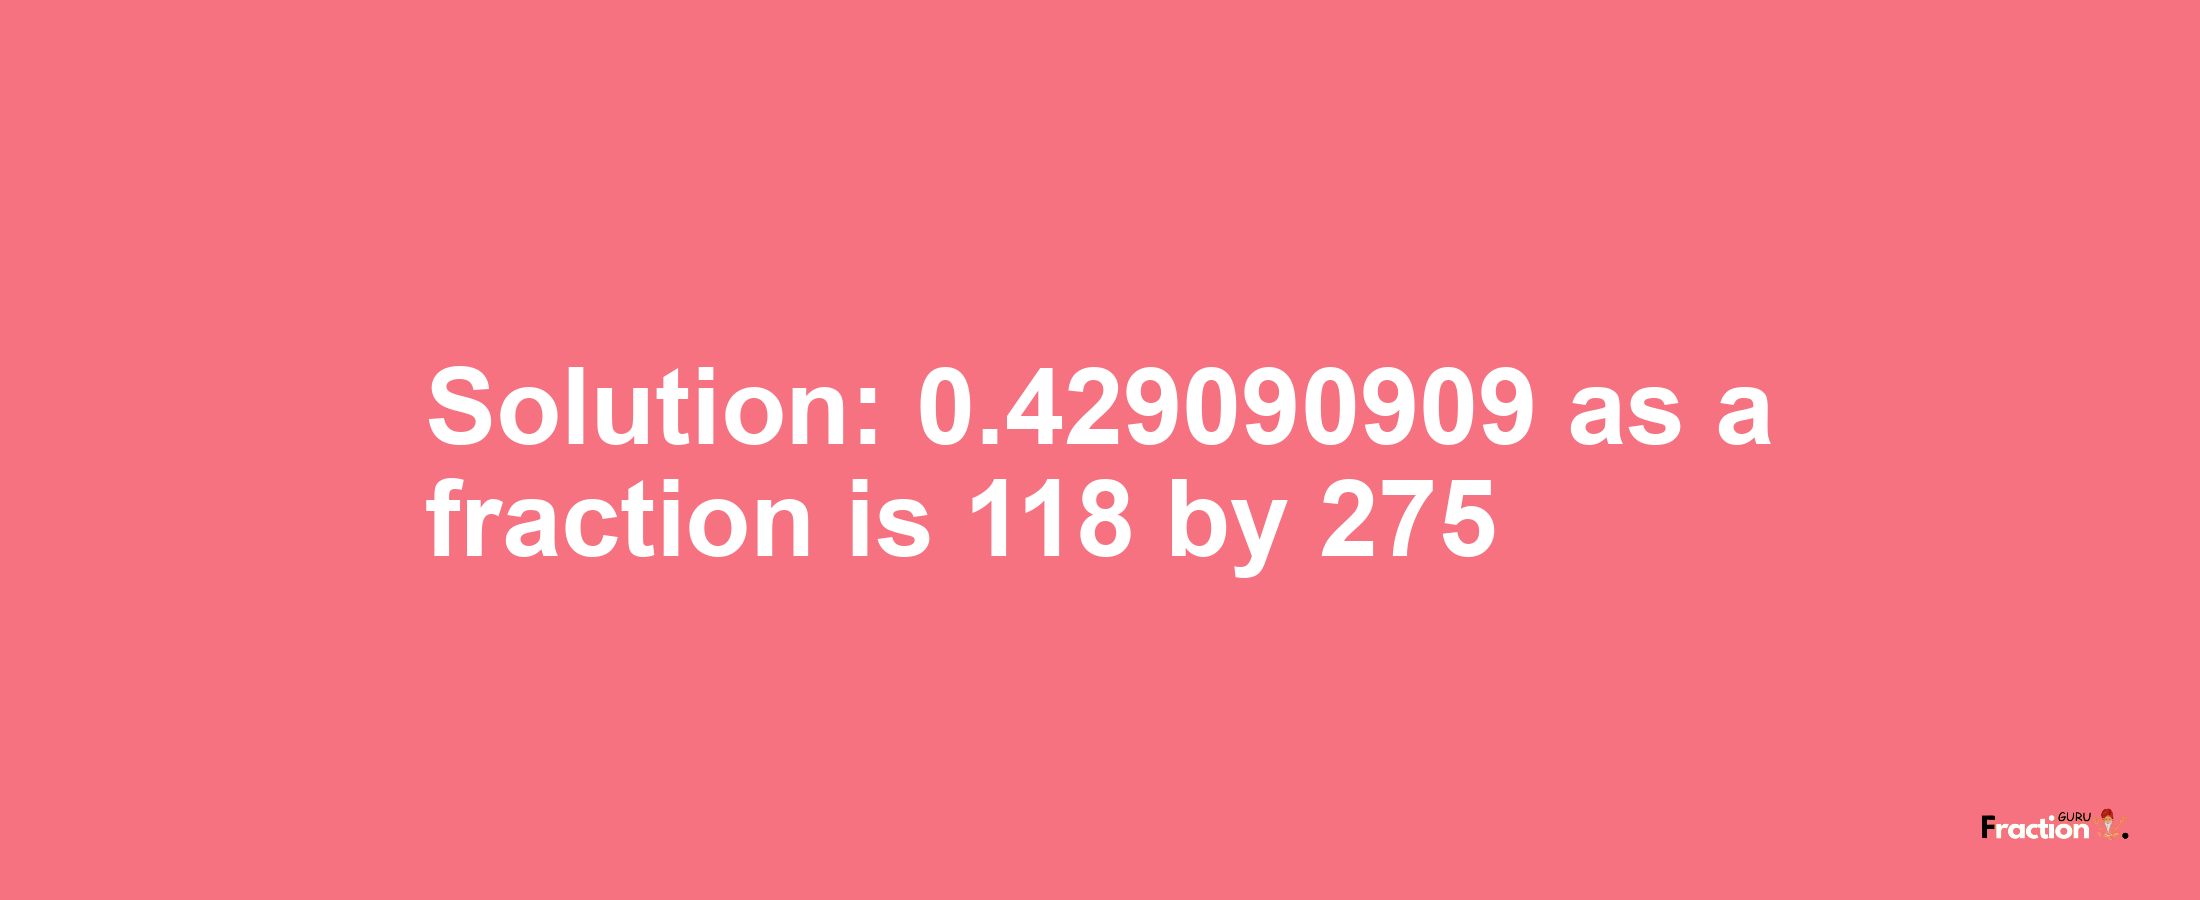 Solution:0.429090909 as a fraction is 118/275